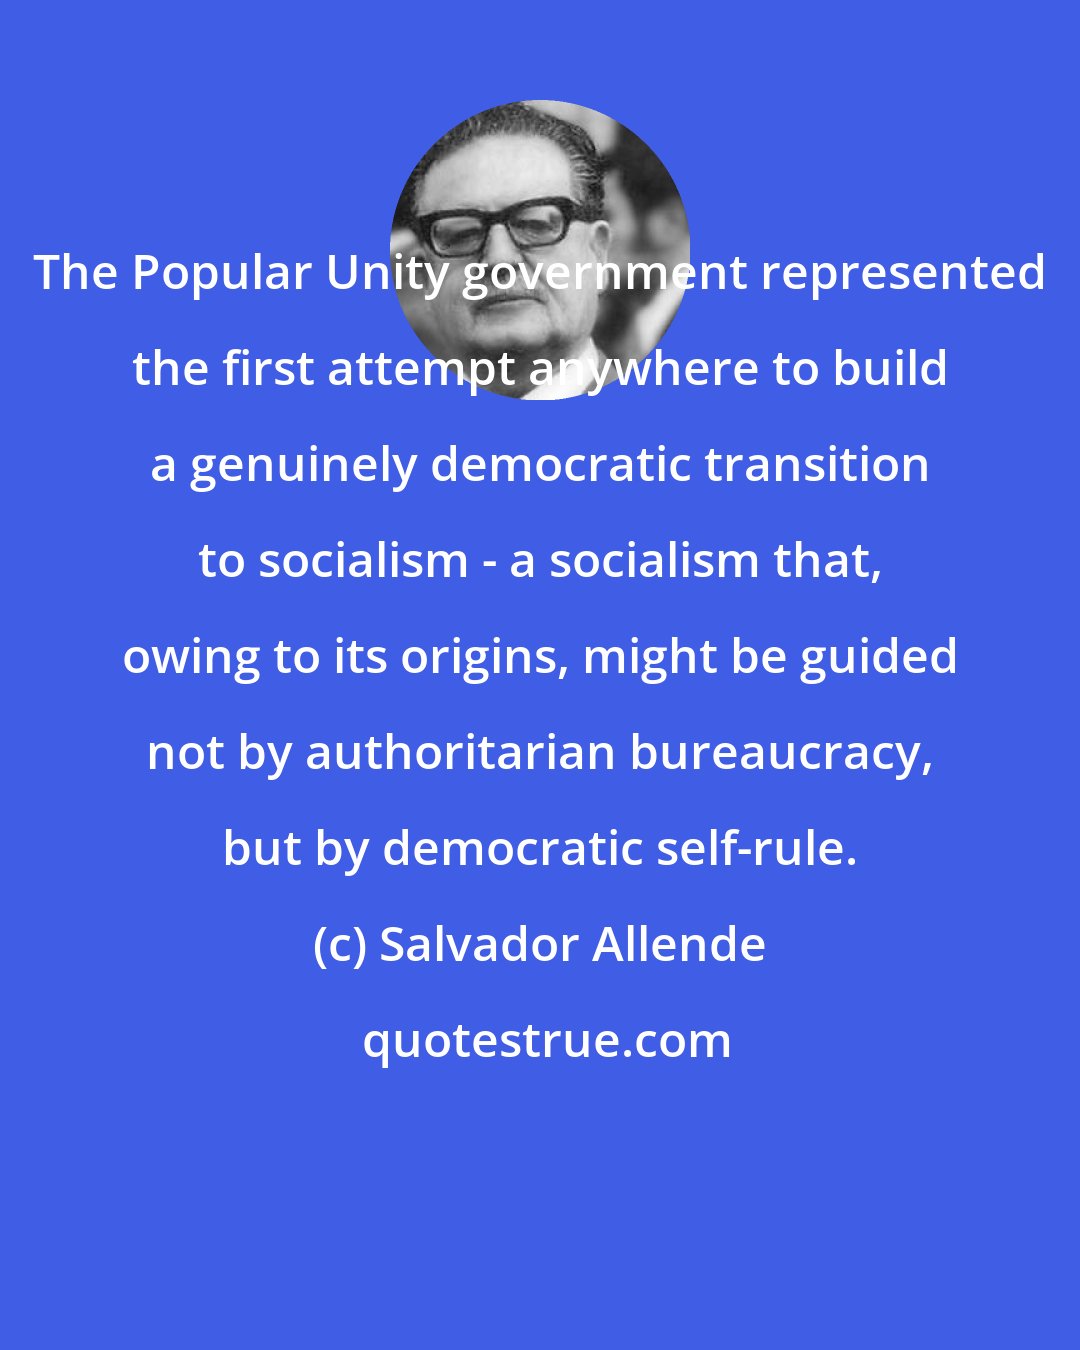 Salvador Allende: The Popular Unity government represented the first attempt anywhere to build a genuinely democratic transition to socialism - a socialism that, owing to its origins, might be guided not by authoritarian bureaucracy, but by democratic self-rule.